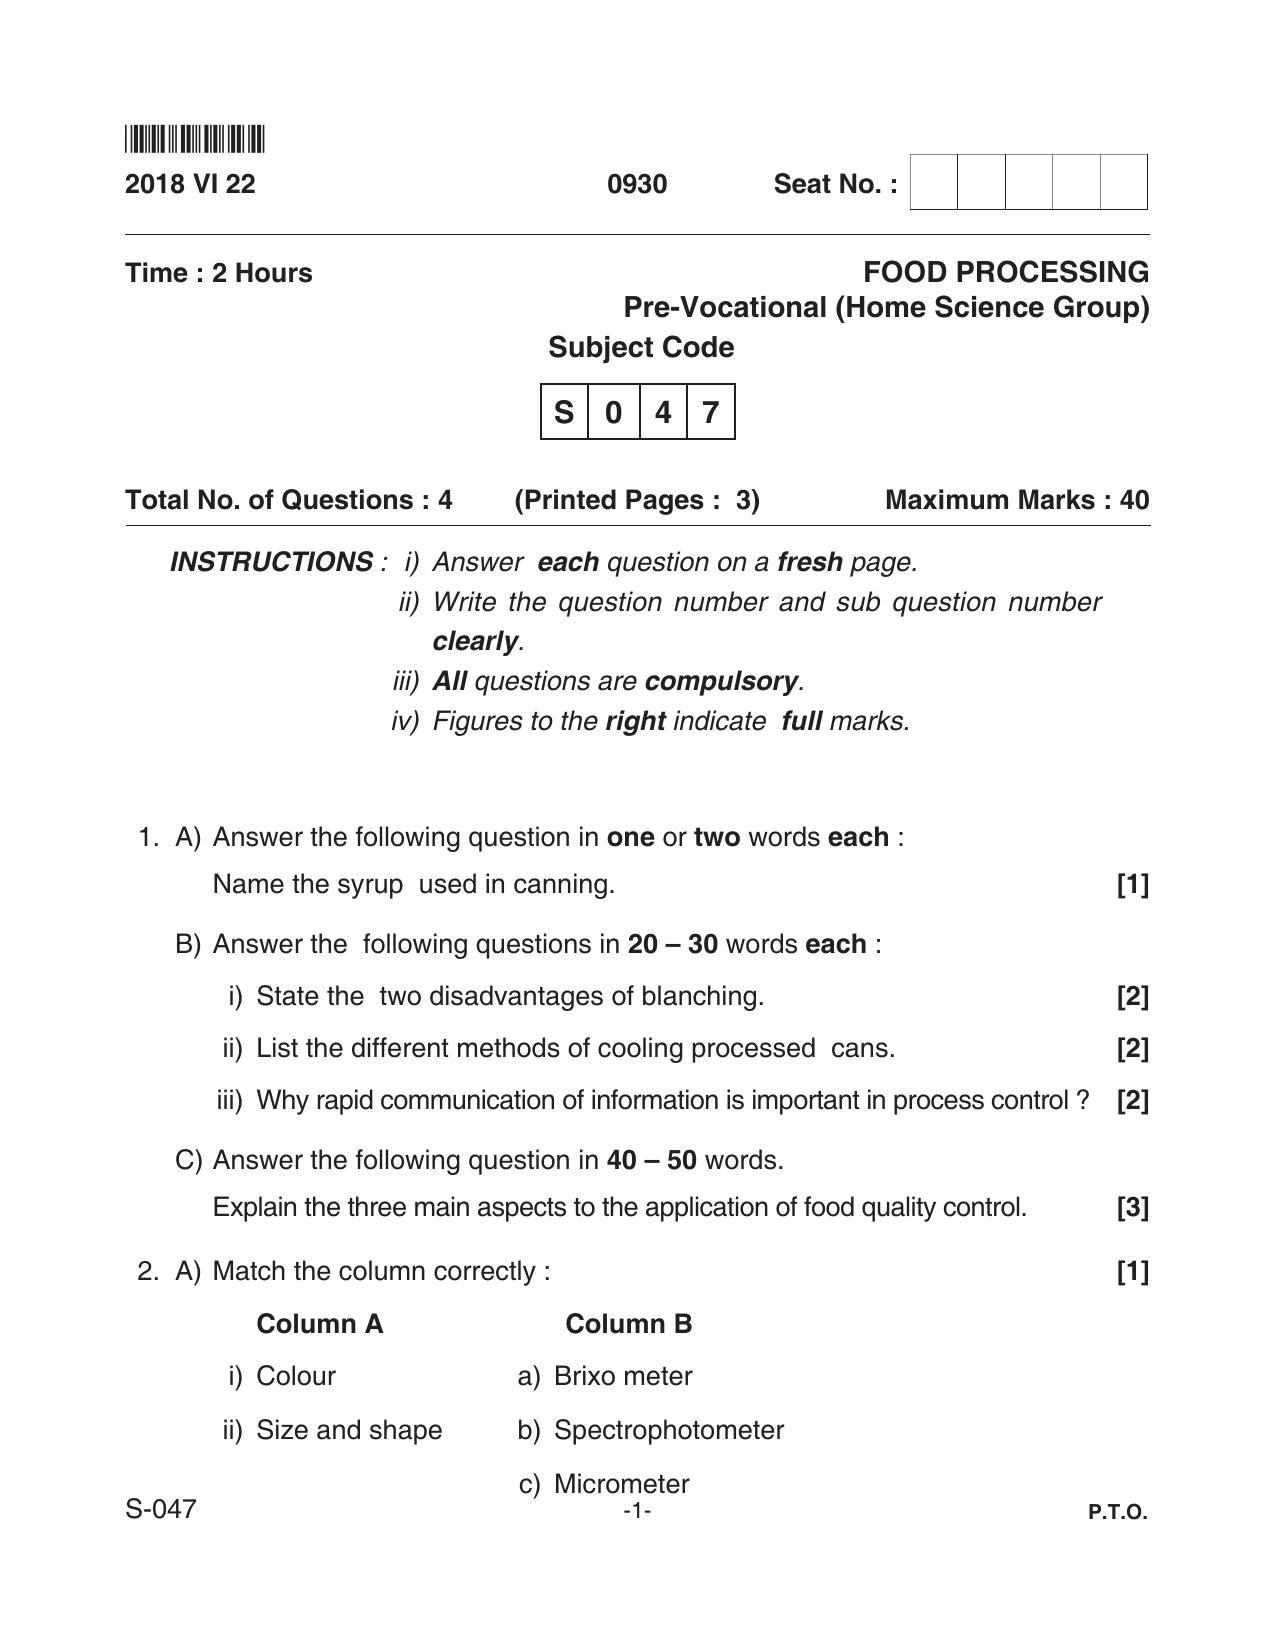 Goa Board Class 10 Food Processing  047 (June 2018) Question Paper - Page 1